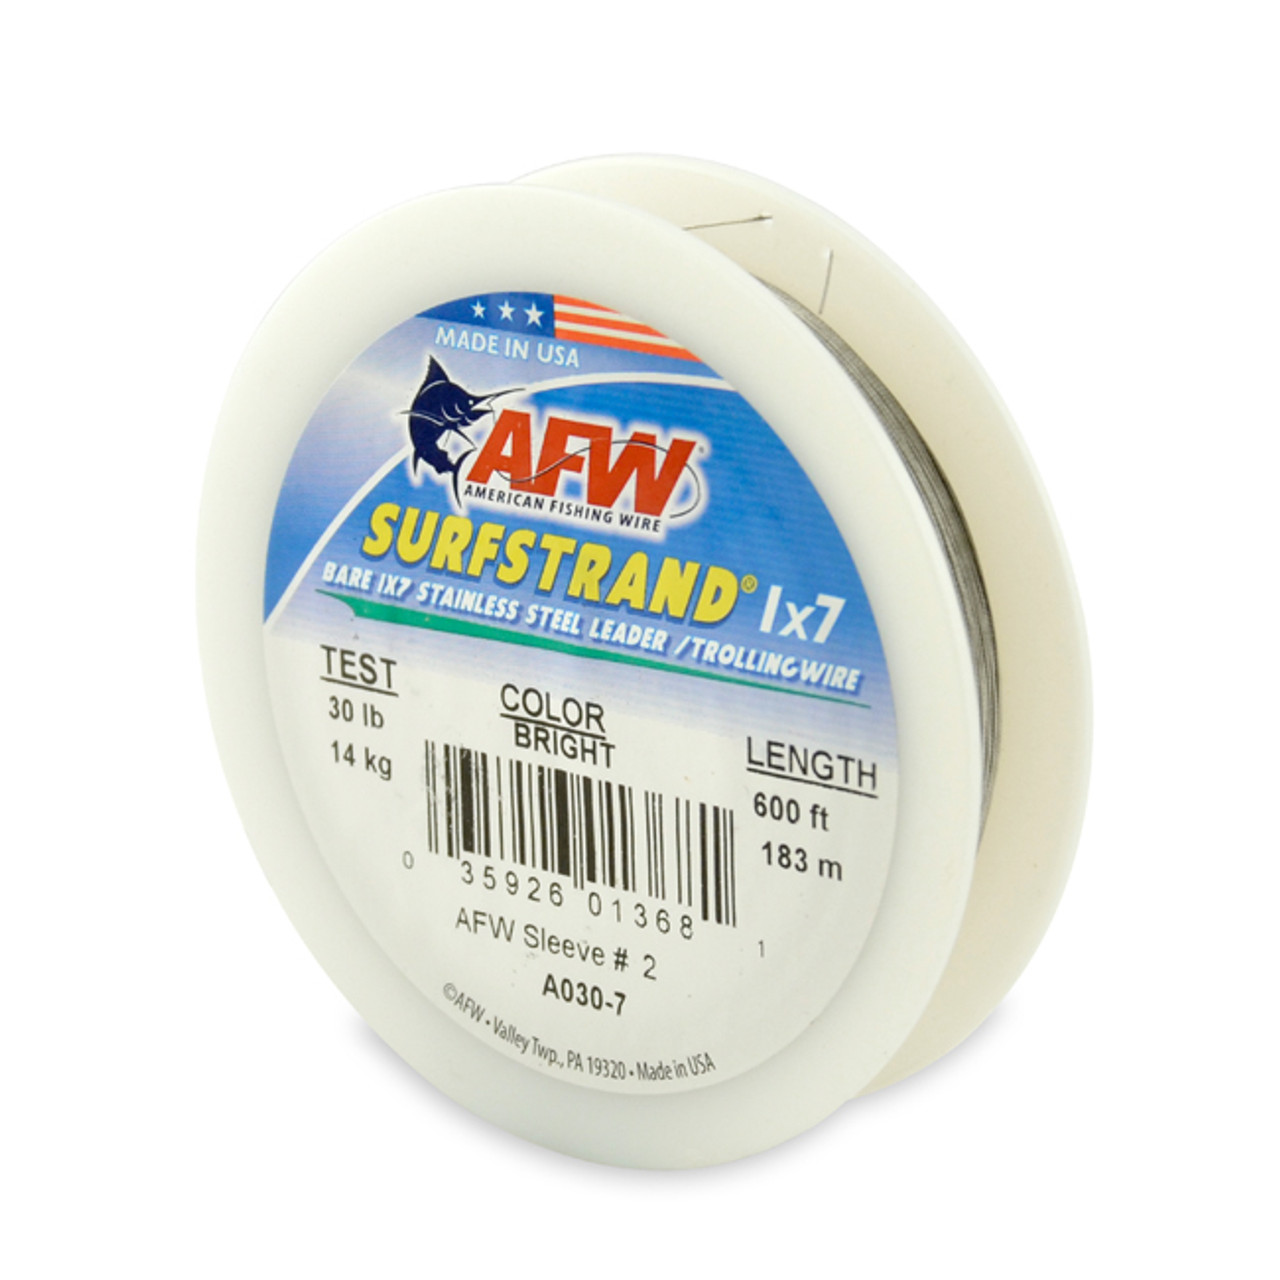 AFW - Surfstrand Bare 1x7 Stainless Steel Leader Wire - Bright